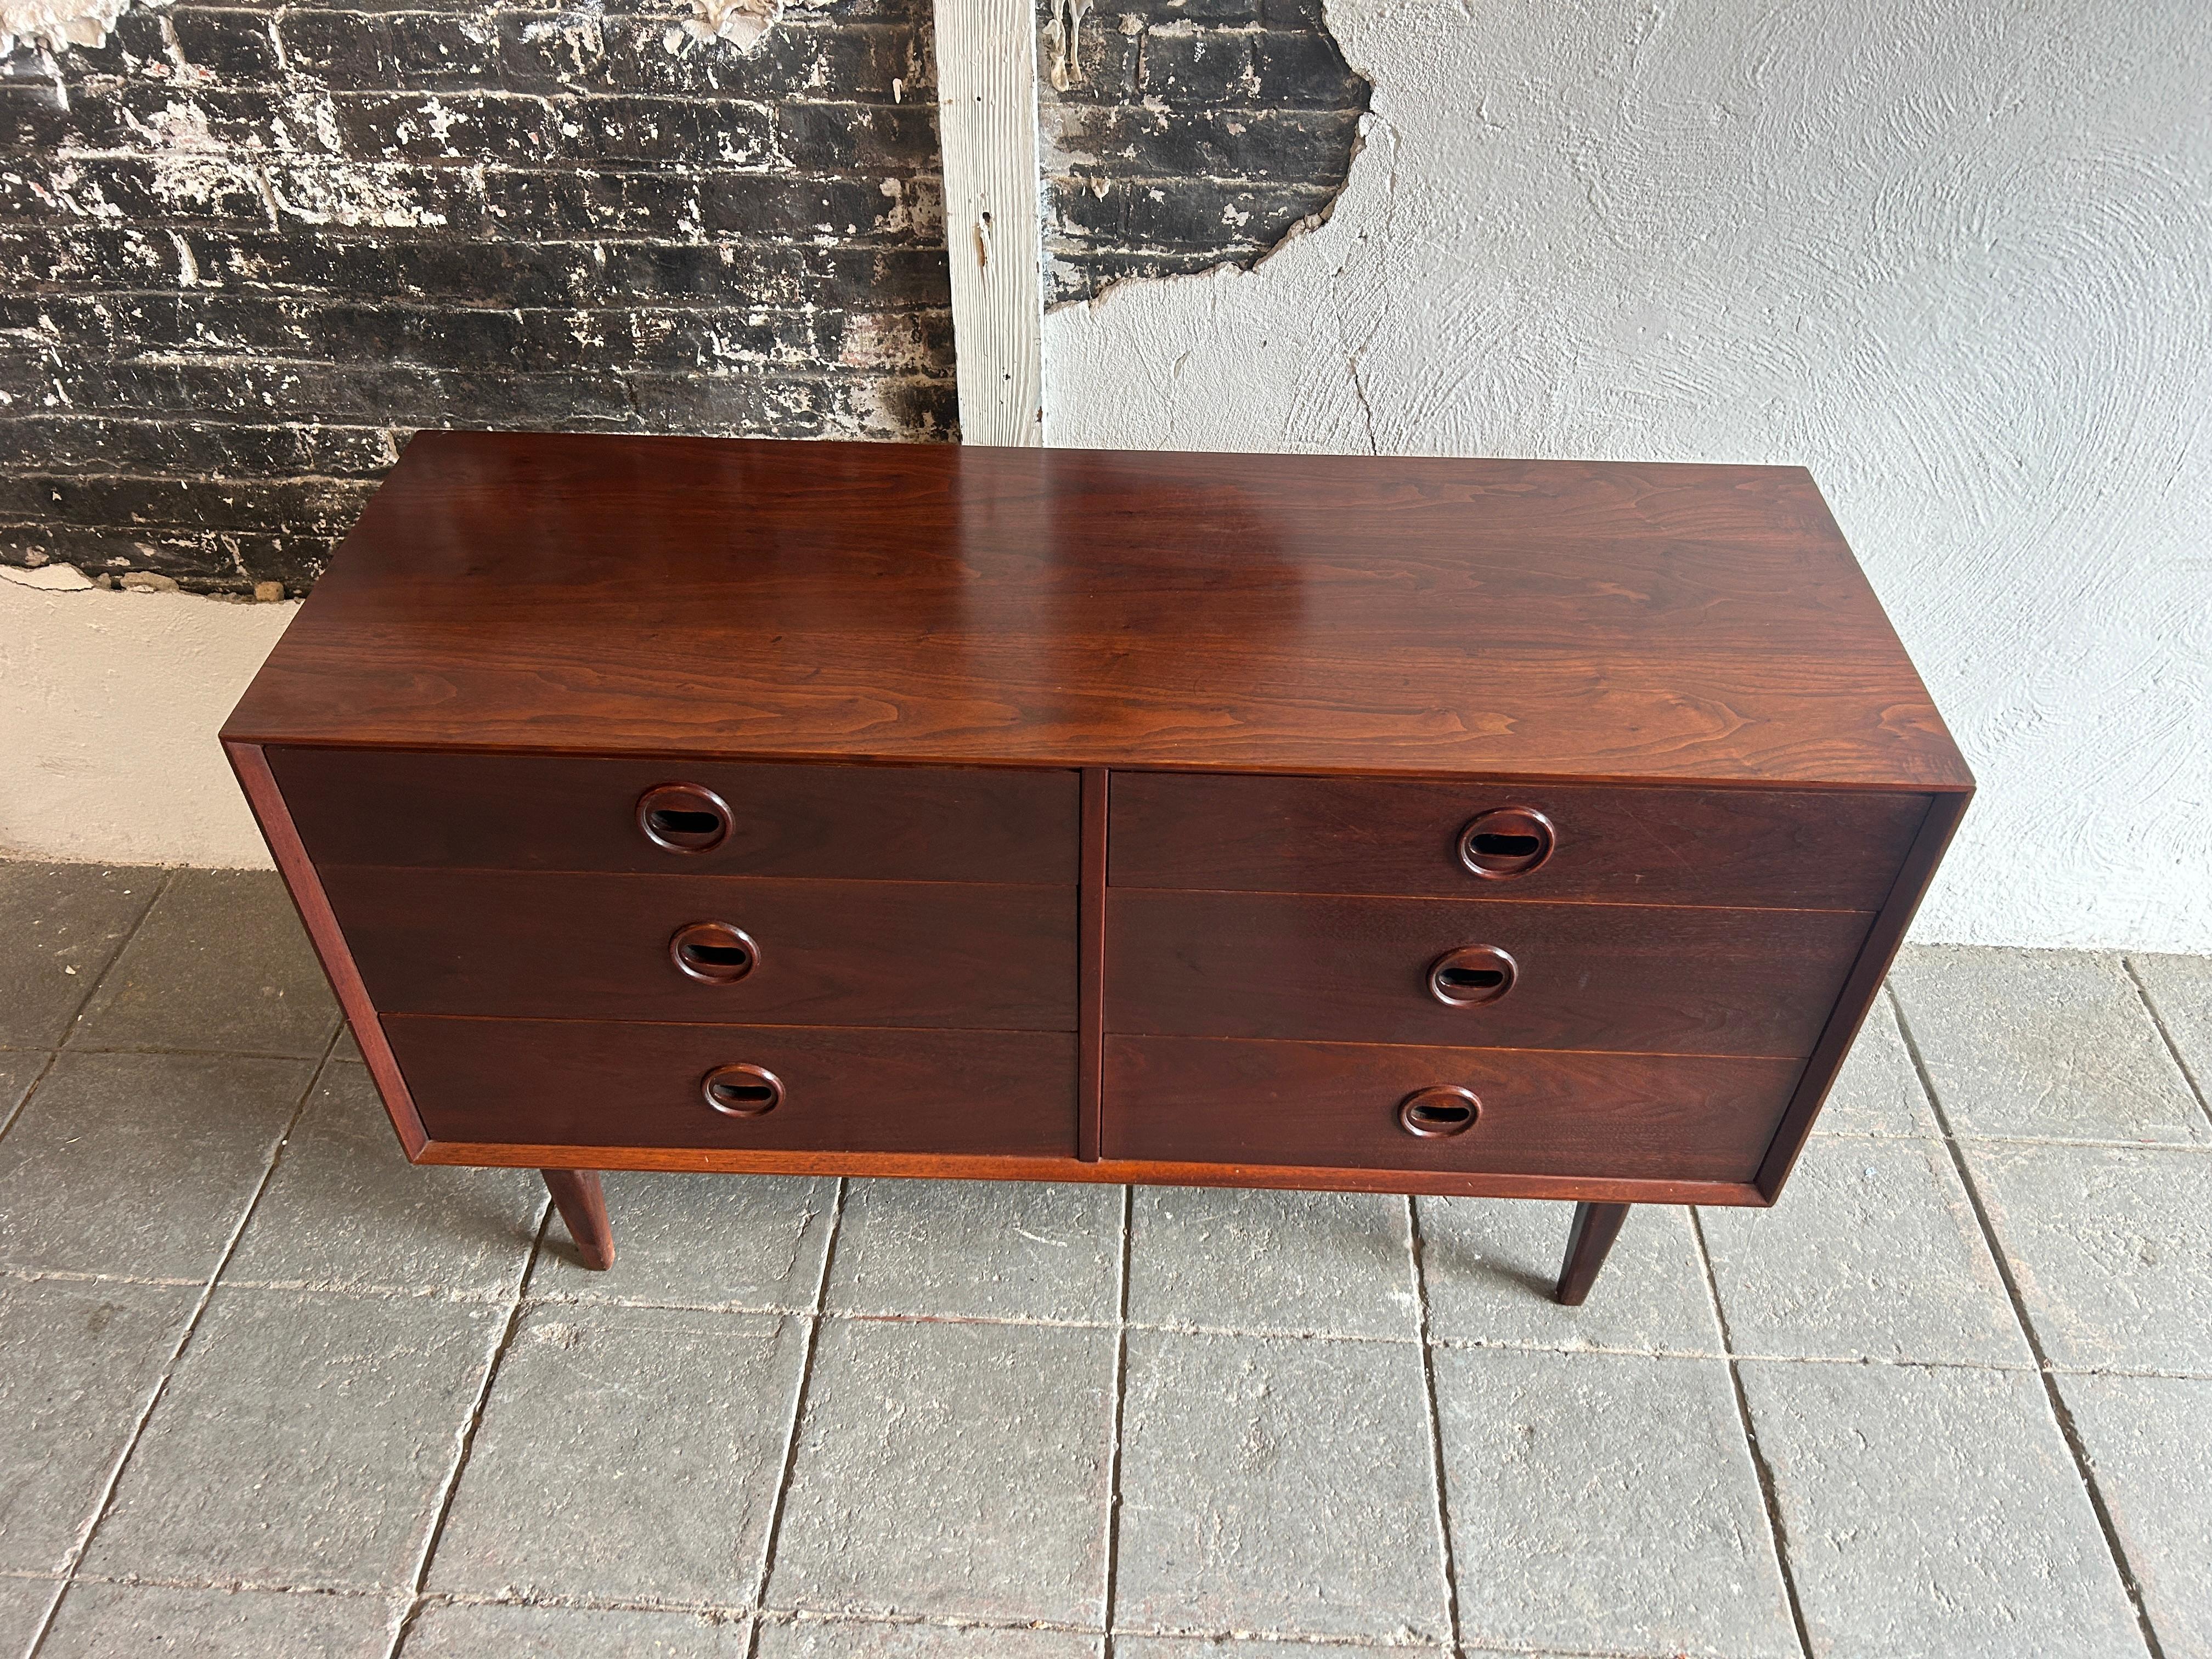 Unique mid century modern walnut 6 drawer dresser with carved handles. Dark reddish walnut wood Danish rosewood style with circular eye carved handle / Pulls. Dovetail solid oak drawer construction. Beautiful wood grain. Made in USA circa 1960.